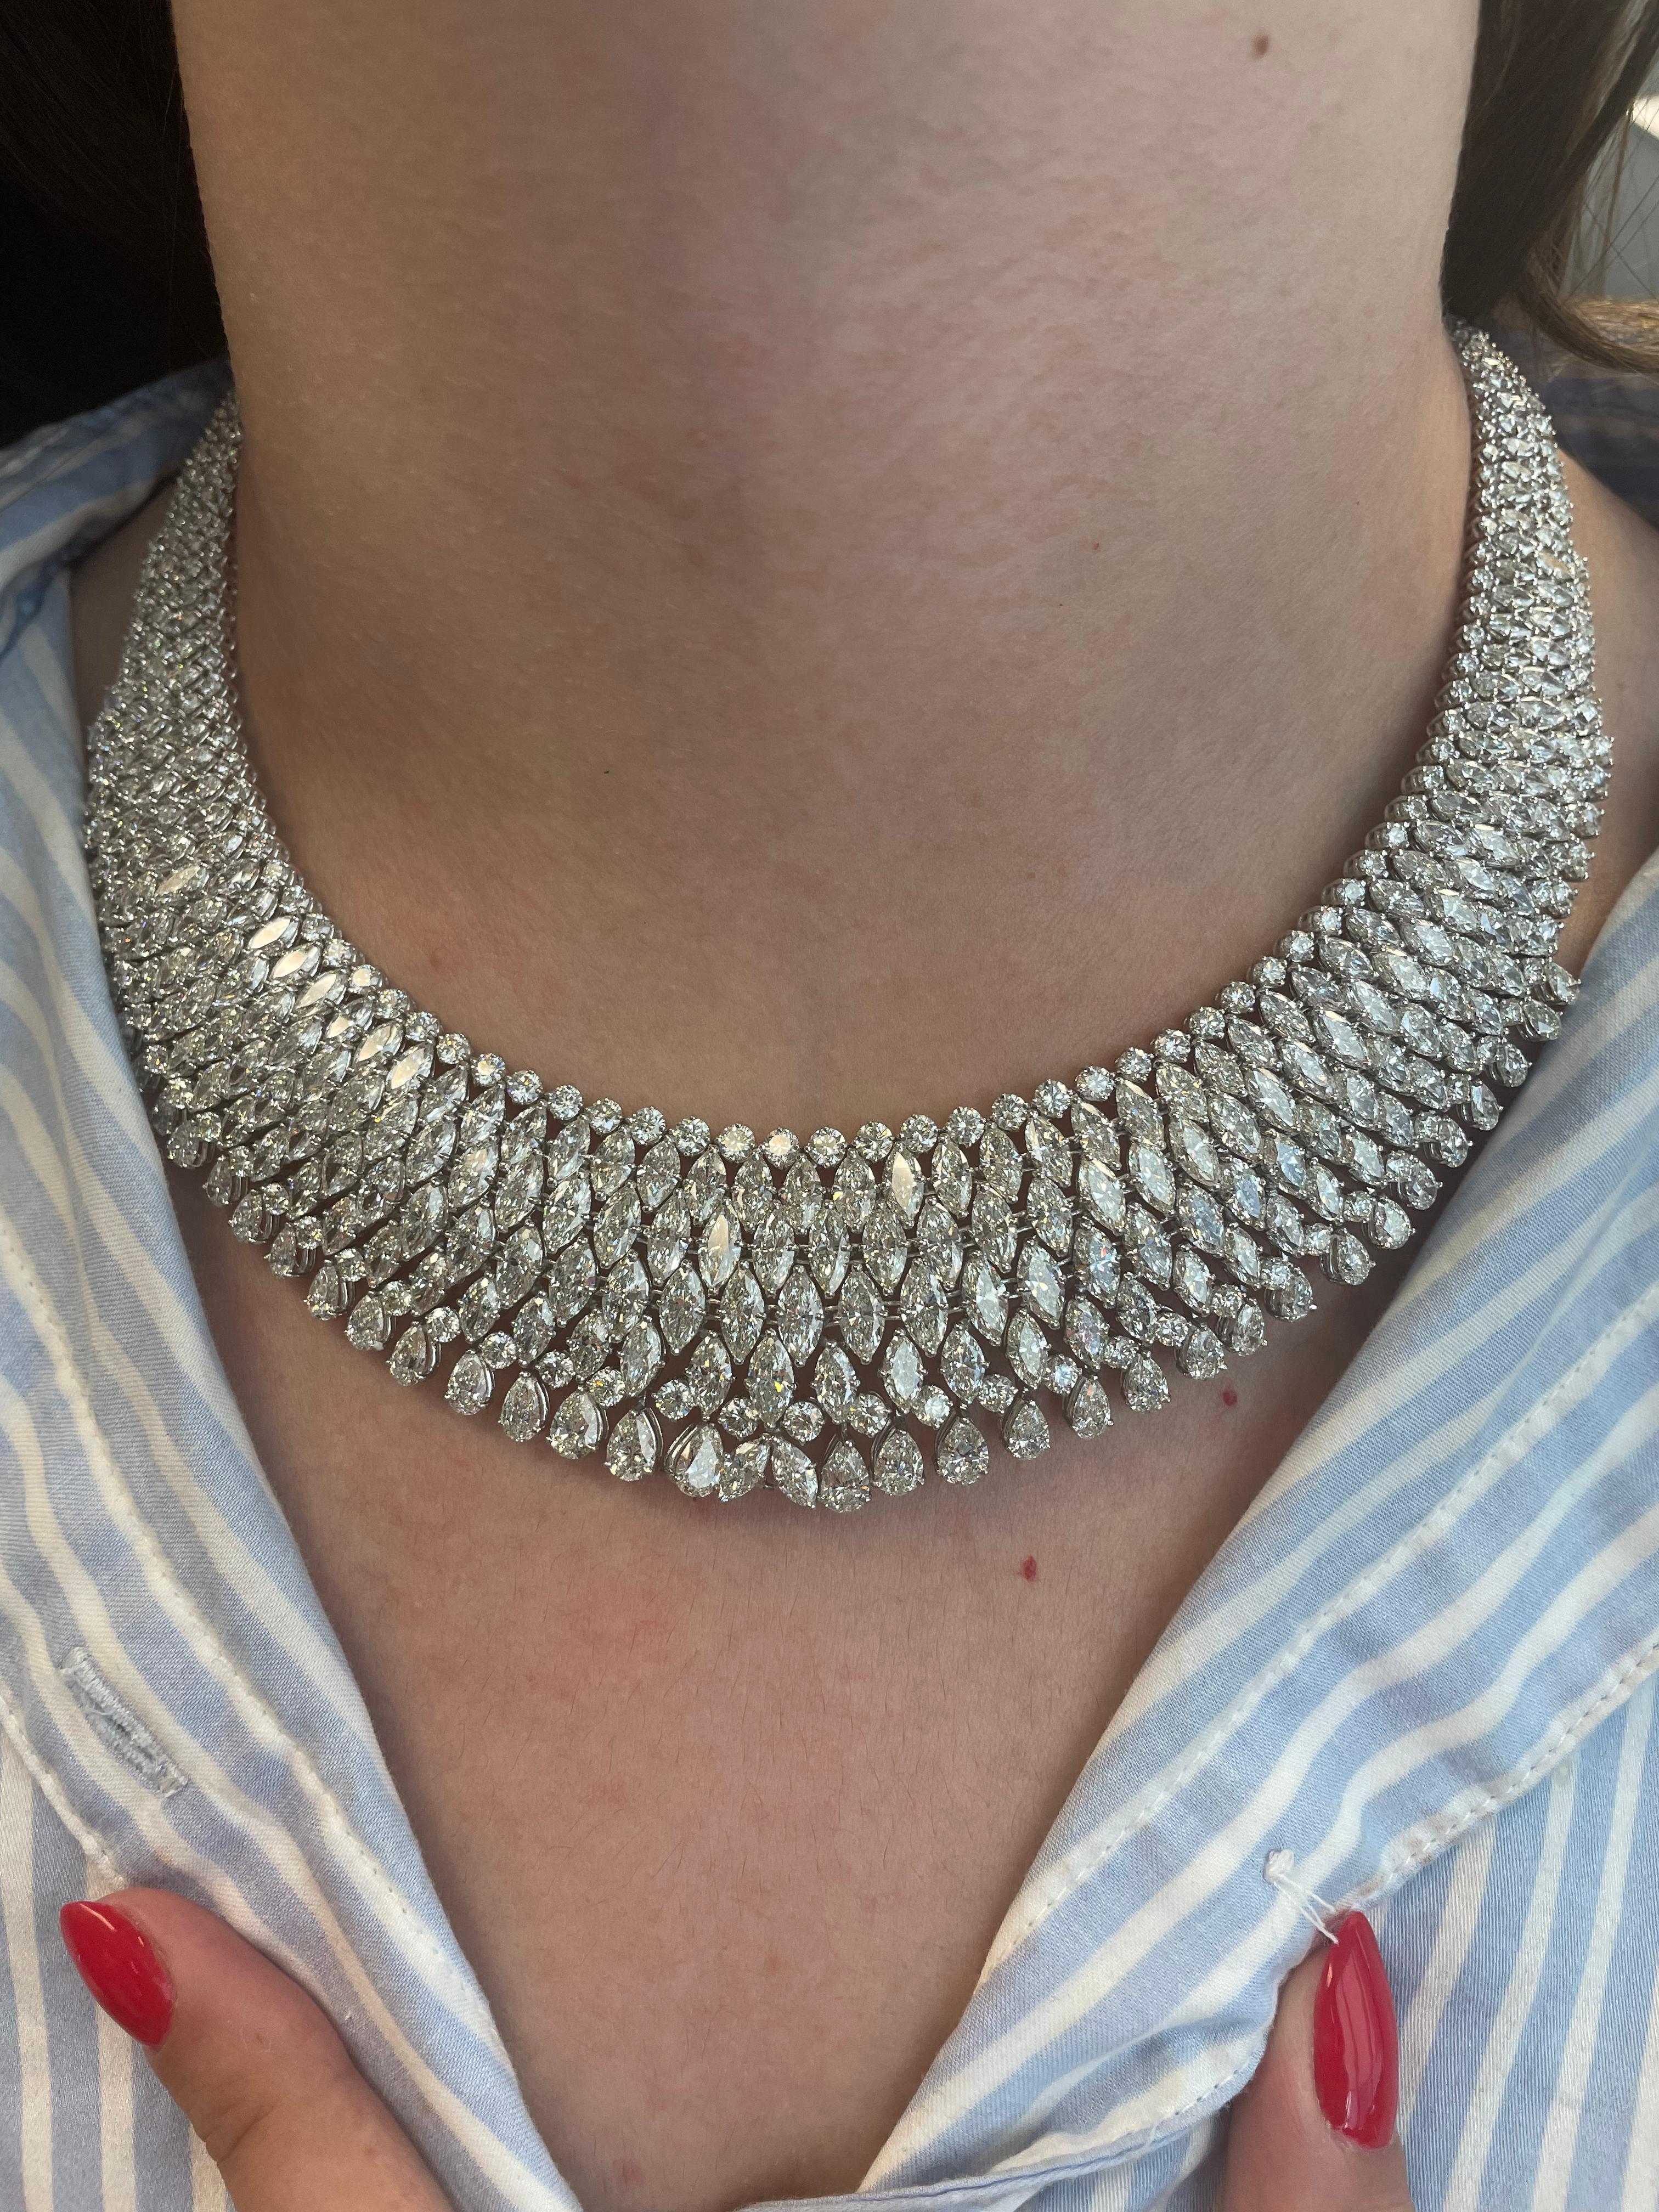 Sensational grand diamond high jewelry necklace studded with hundreds of diamonds.
Approximately 82 carats of marques, round, and pear cut diamond. Approximately H/I color and VS clarity. Primarily marques diamonds complimented by round brilliant